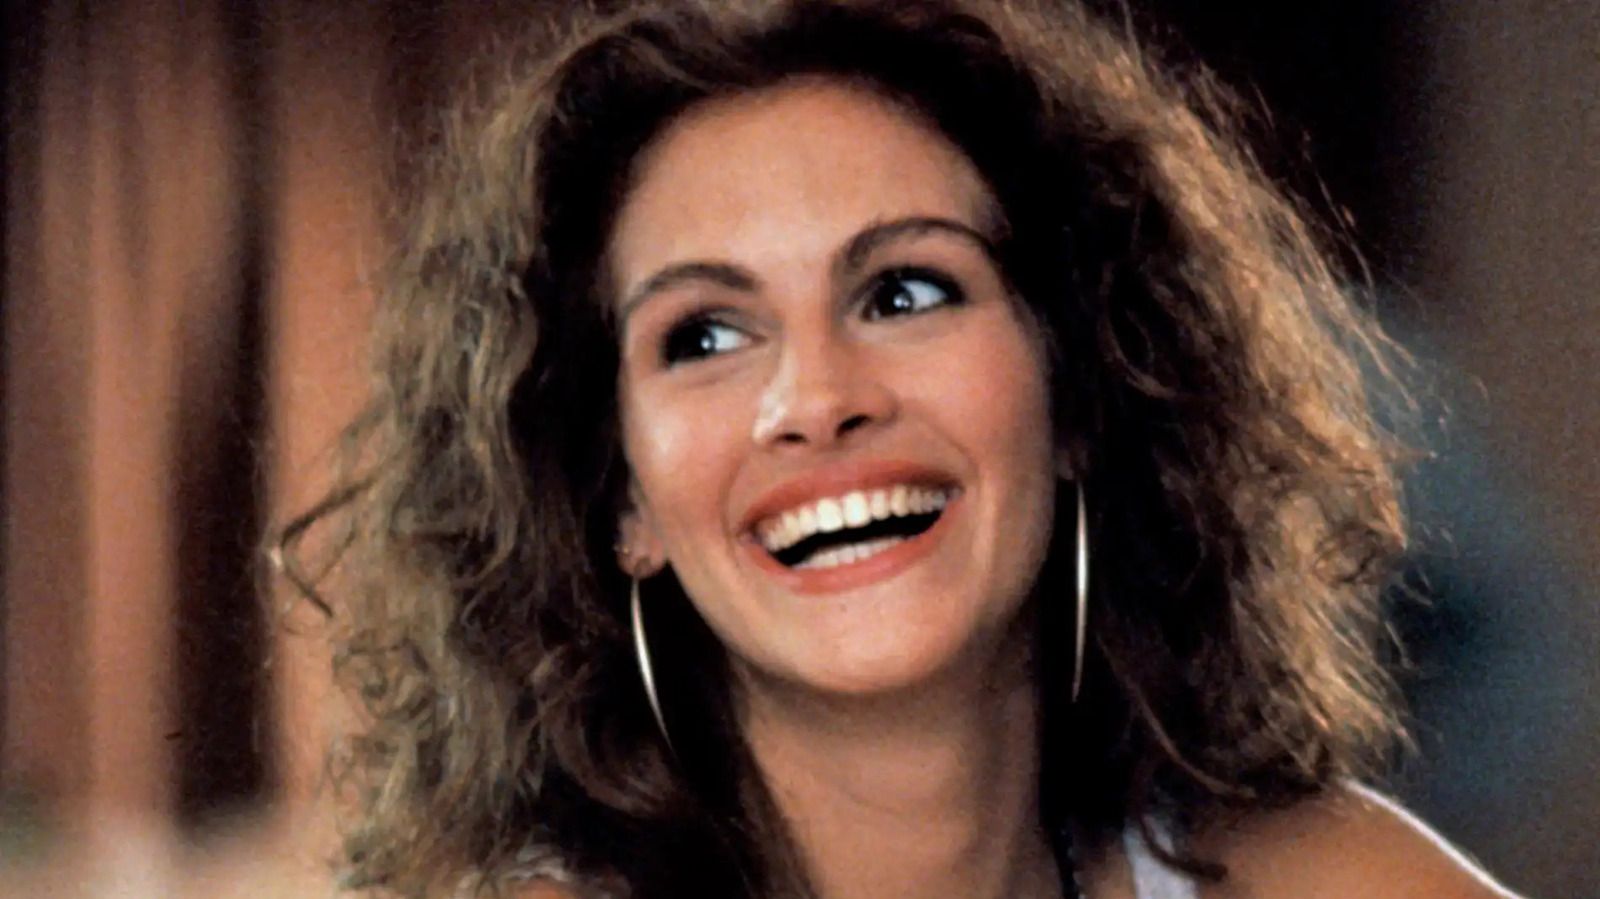 The 12 Best Julia Roberts Movies, Ranked